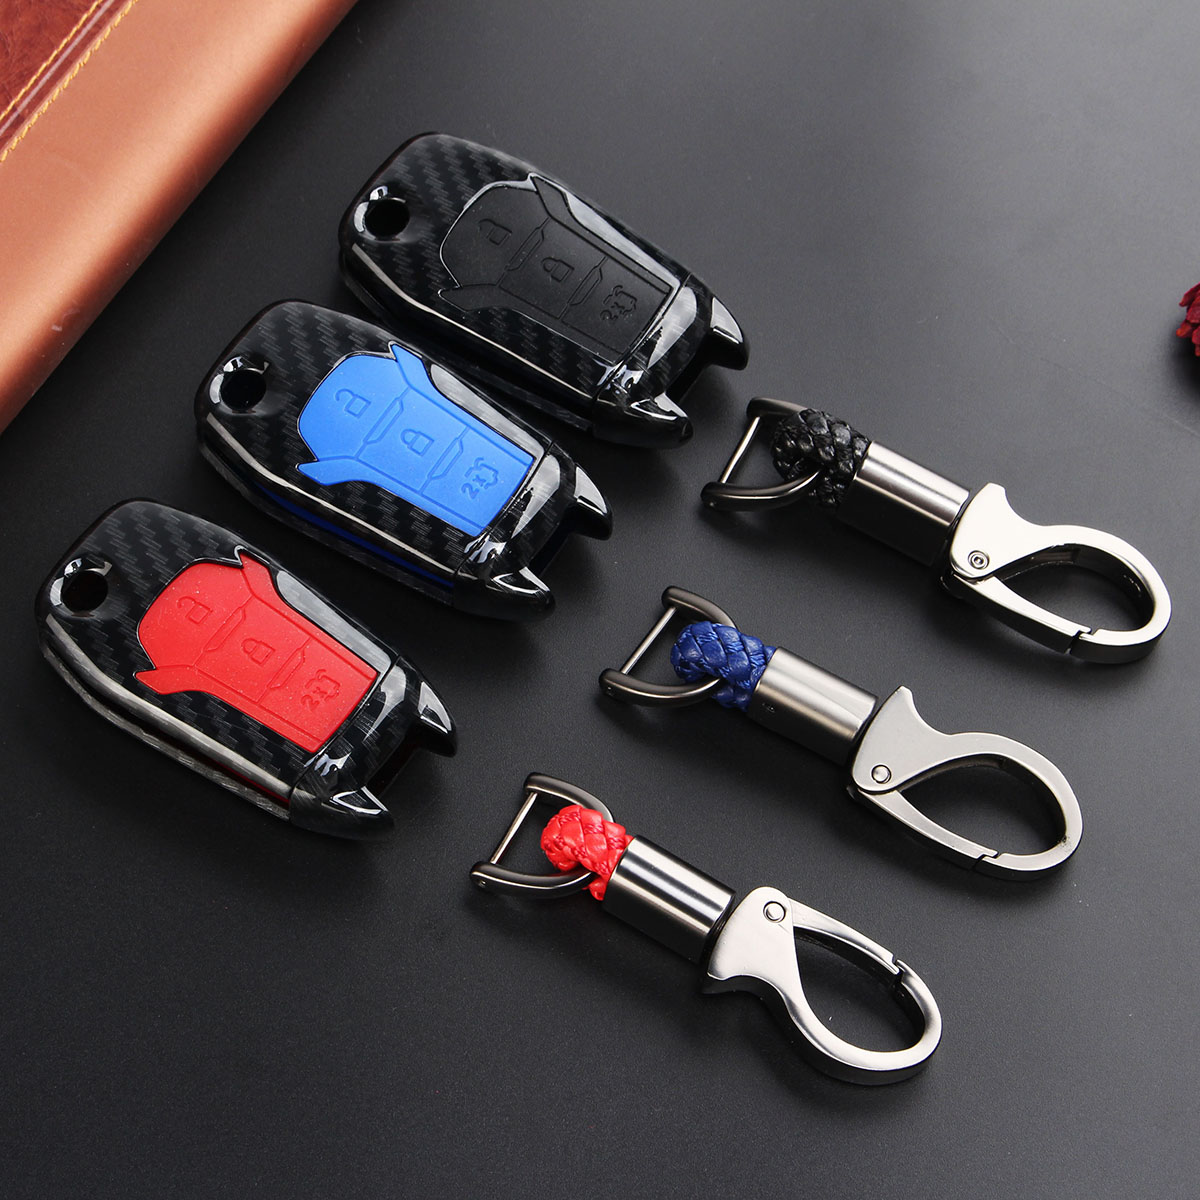 

Plastic and Rubber Car Key Case Bag Protector Cover Remote Control Fob for Ford F-150 F-250 F-350 Explorer Ranger